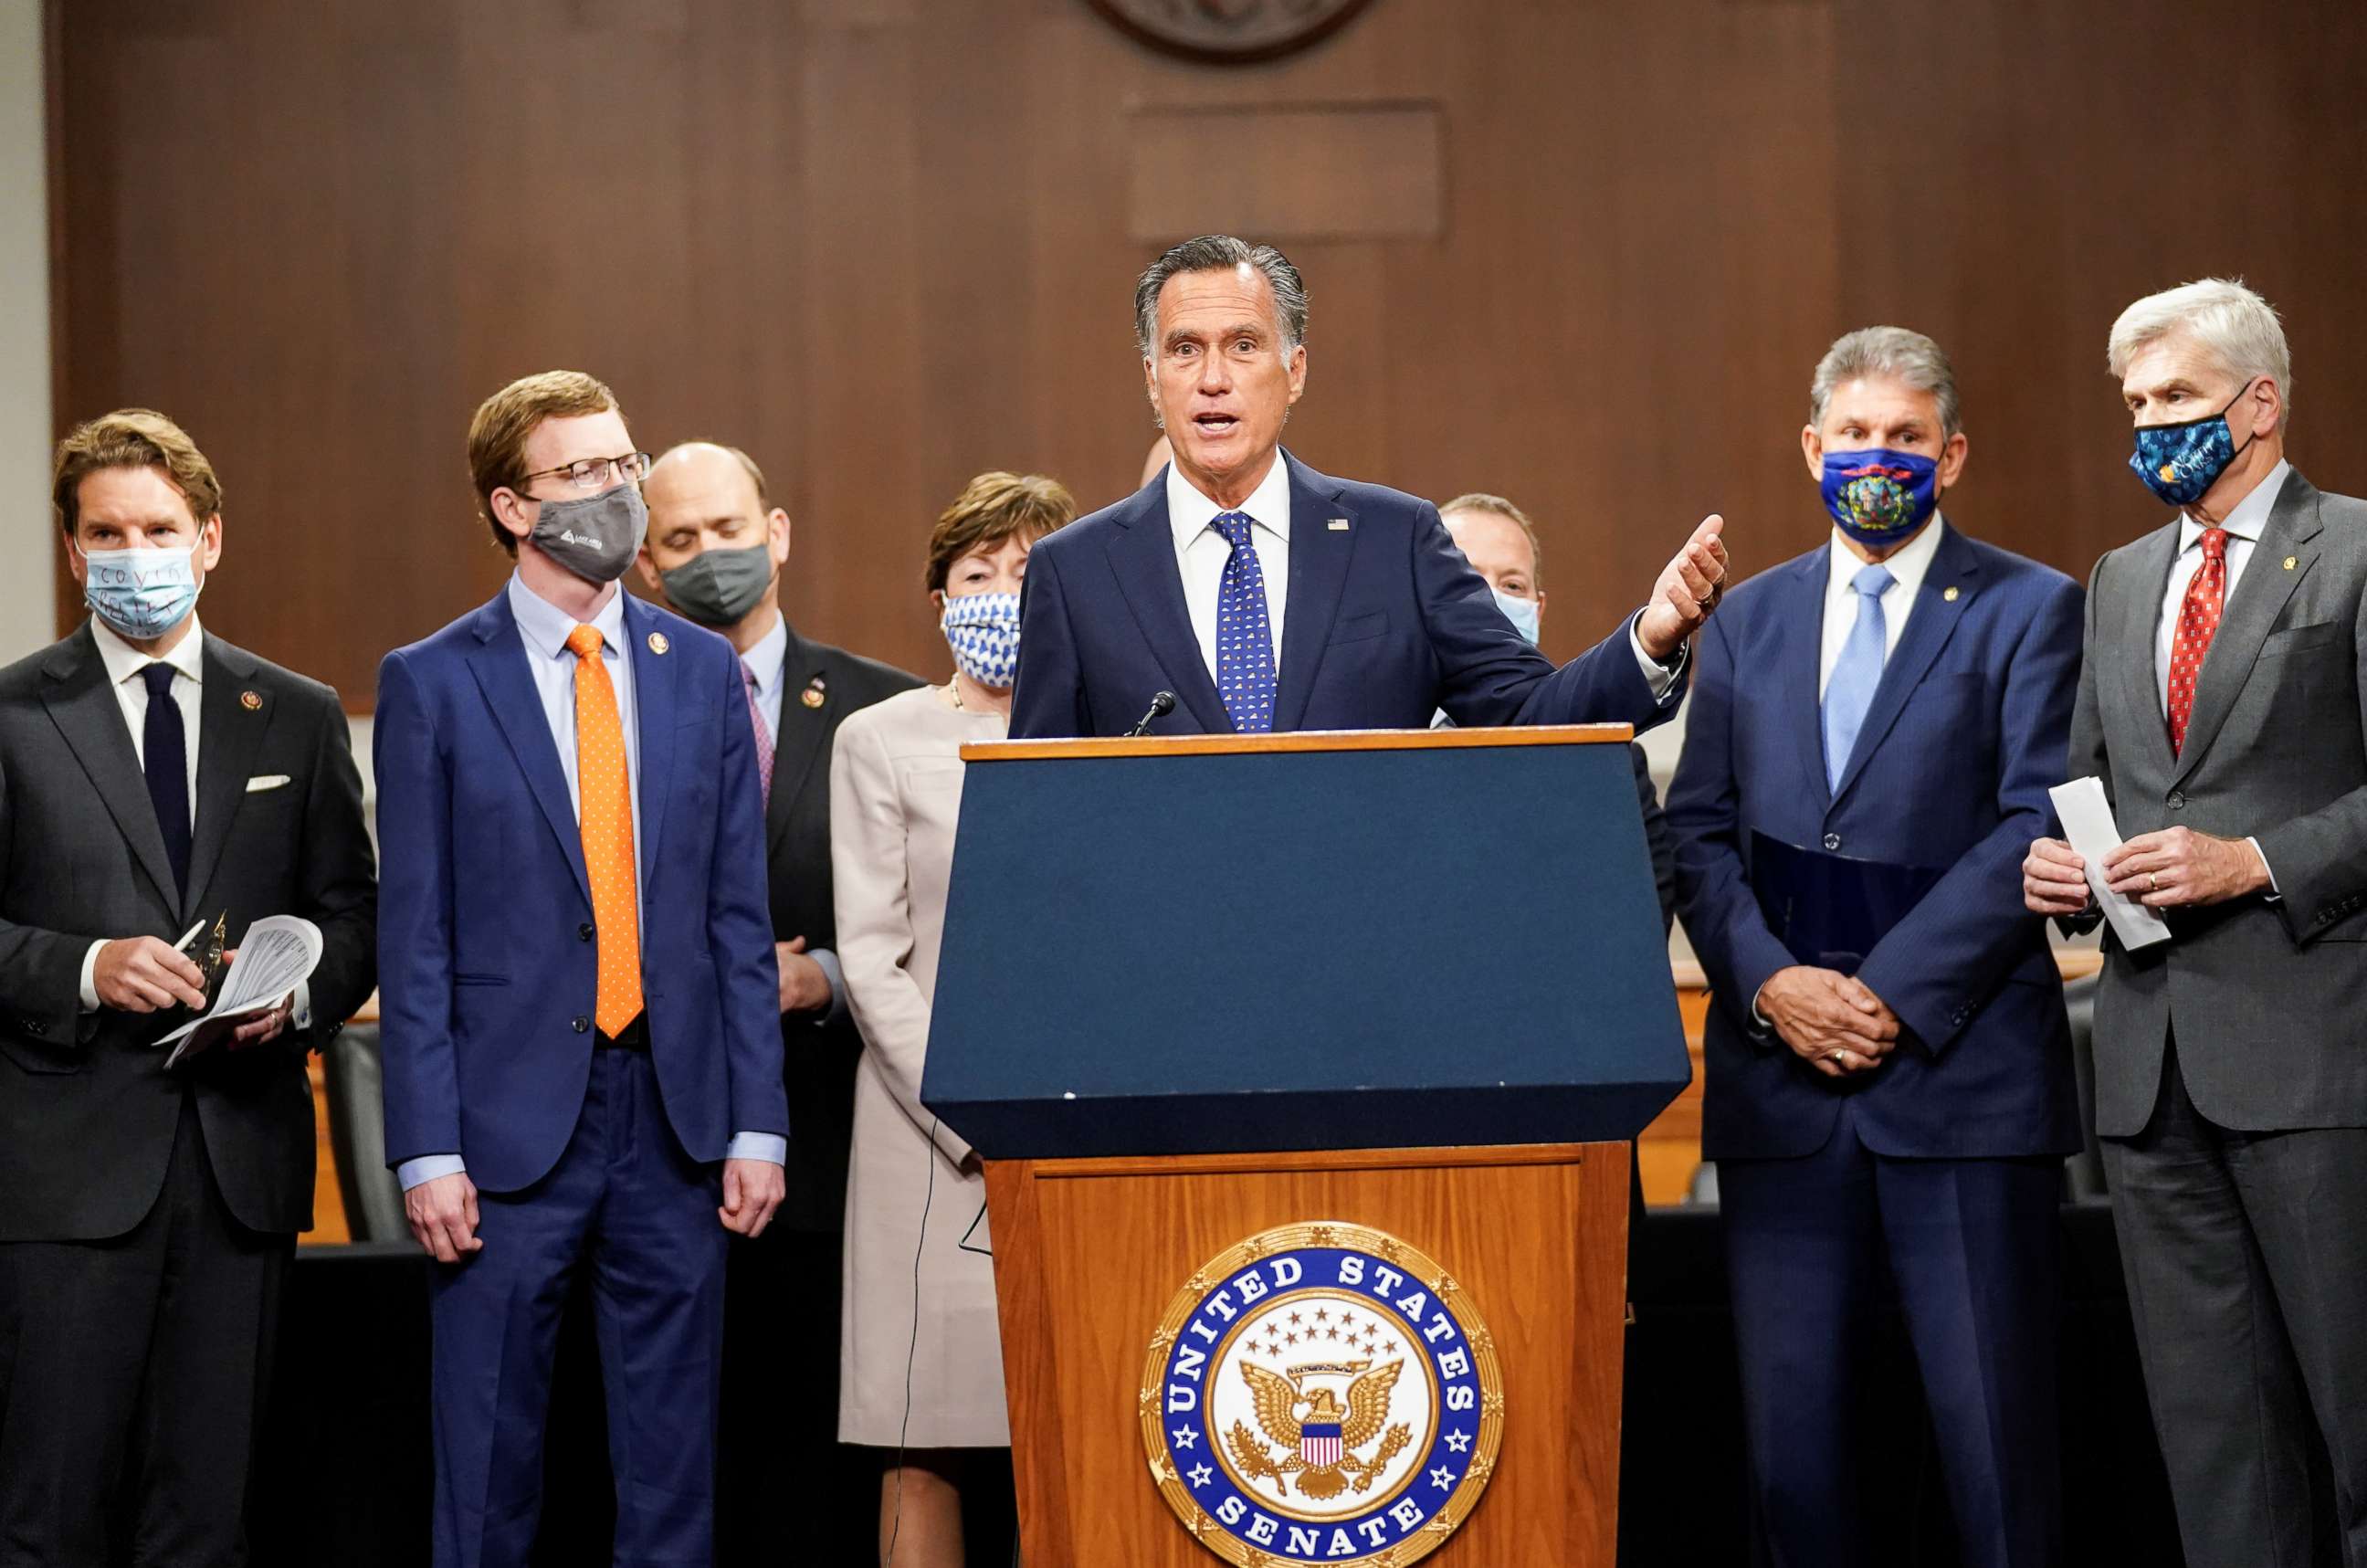 PHOTO: Senator Mitt Romney speaks as bipartisan members of the Senate and House gather to announce a framework for fresh coronavirus disease (COVID-19) relief legislation at a news conference on Capitol Hill in Washington, Dec. 1, 2020.